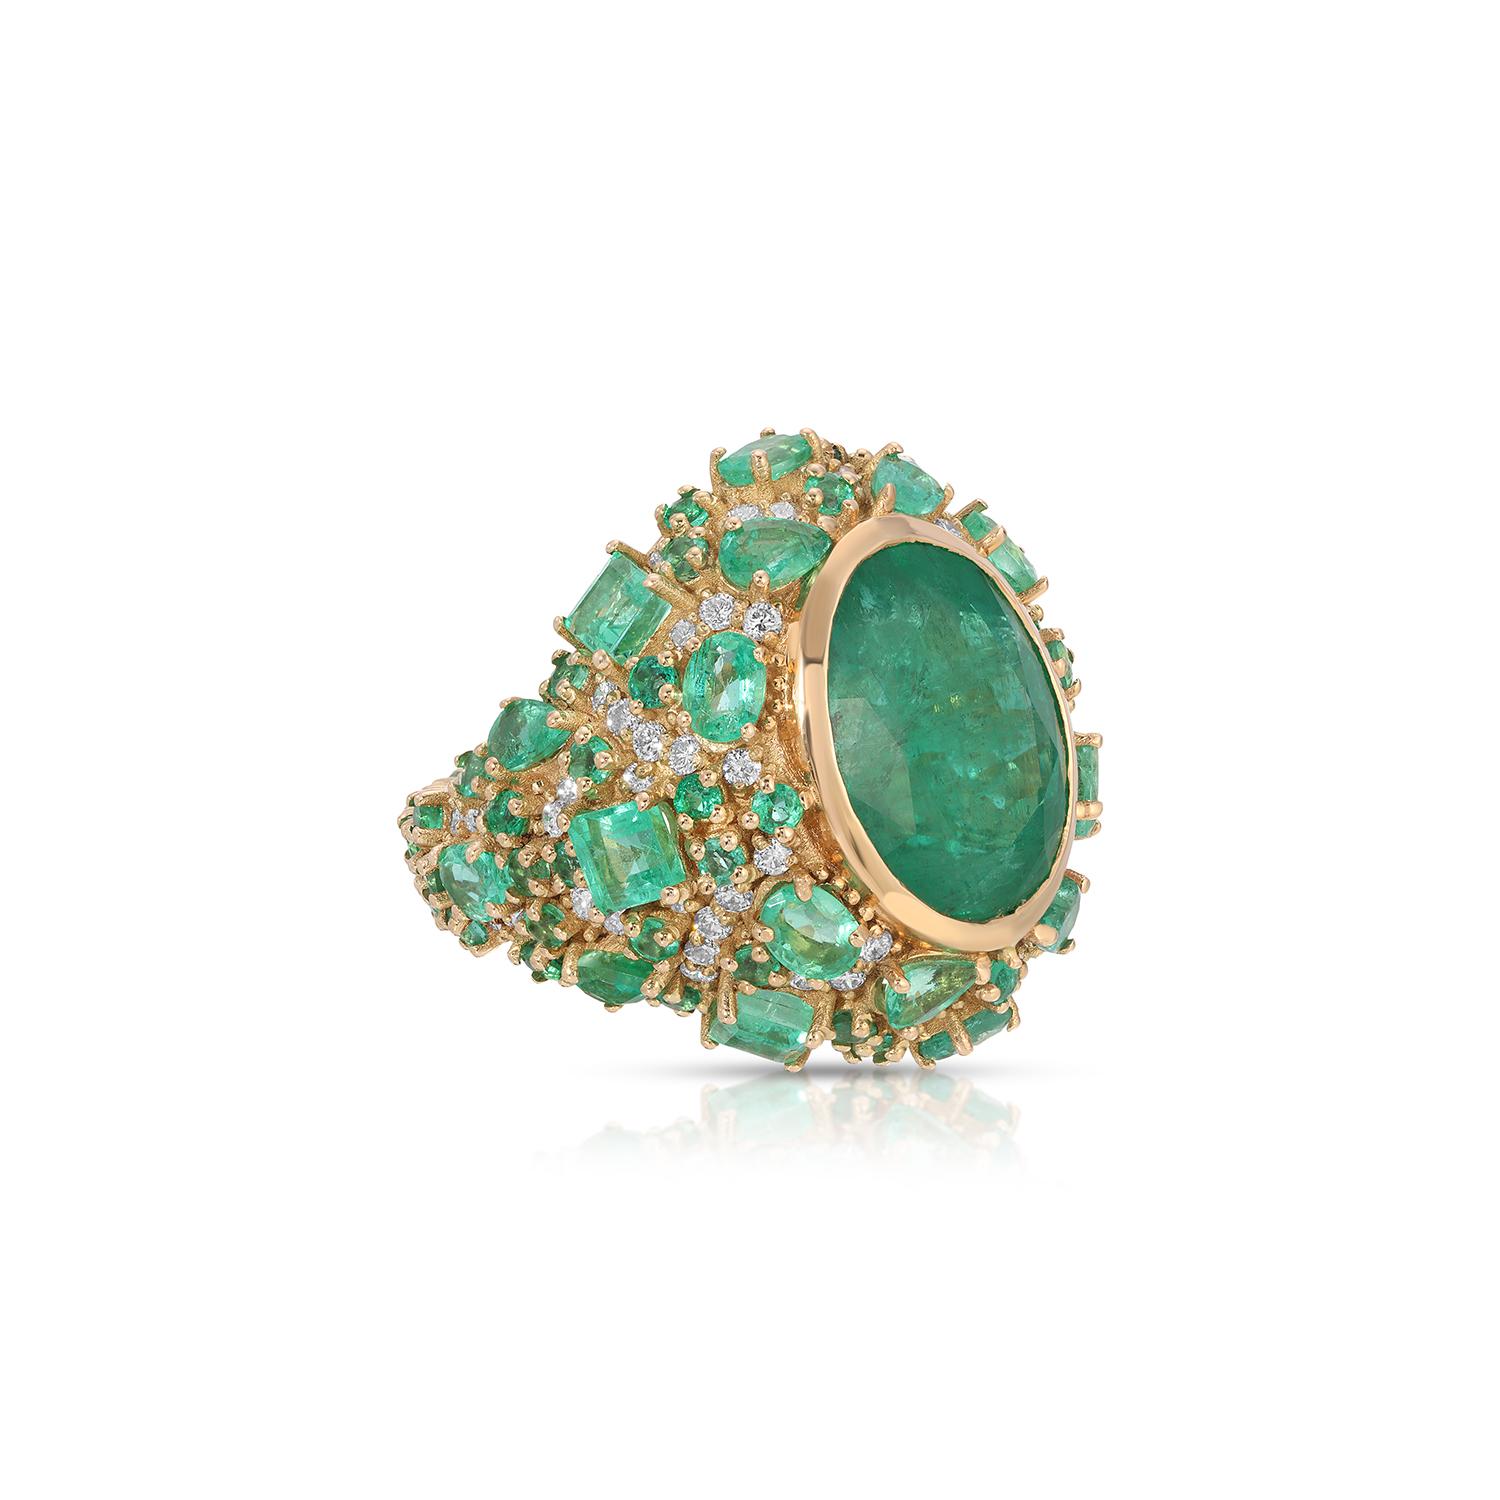 The Emerald Bomba Diamond Cocktail Ring… a masterpiece of luxurious high jewelry. Crafted from fiery emerald baguettes, brilliant cut diamonds and starring a 15.23 Columbian Emerald of exalted luminosity, this exceptional piece define the glamorous